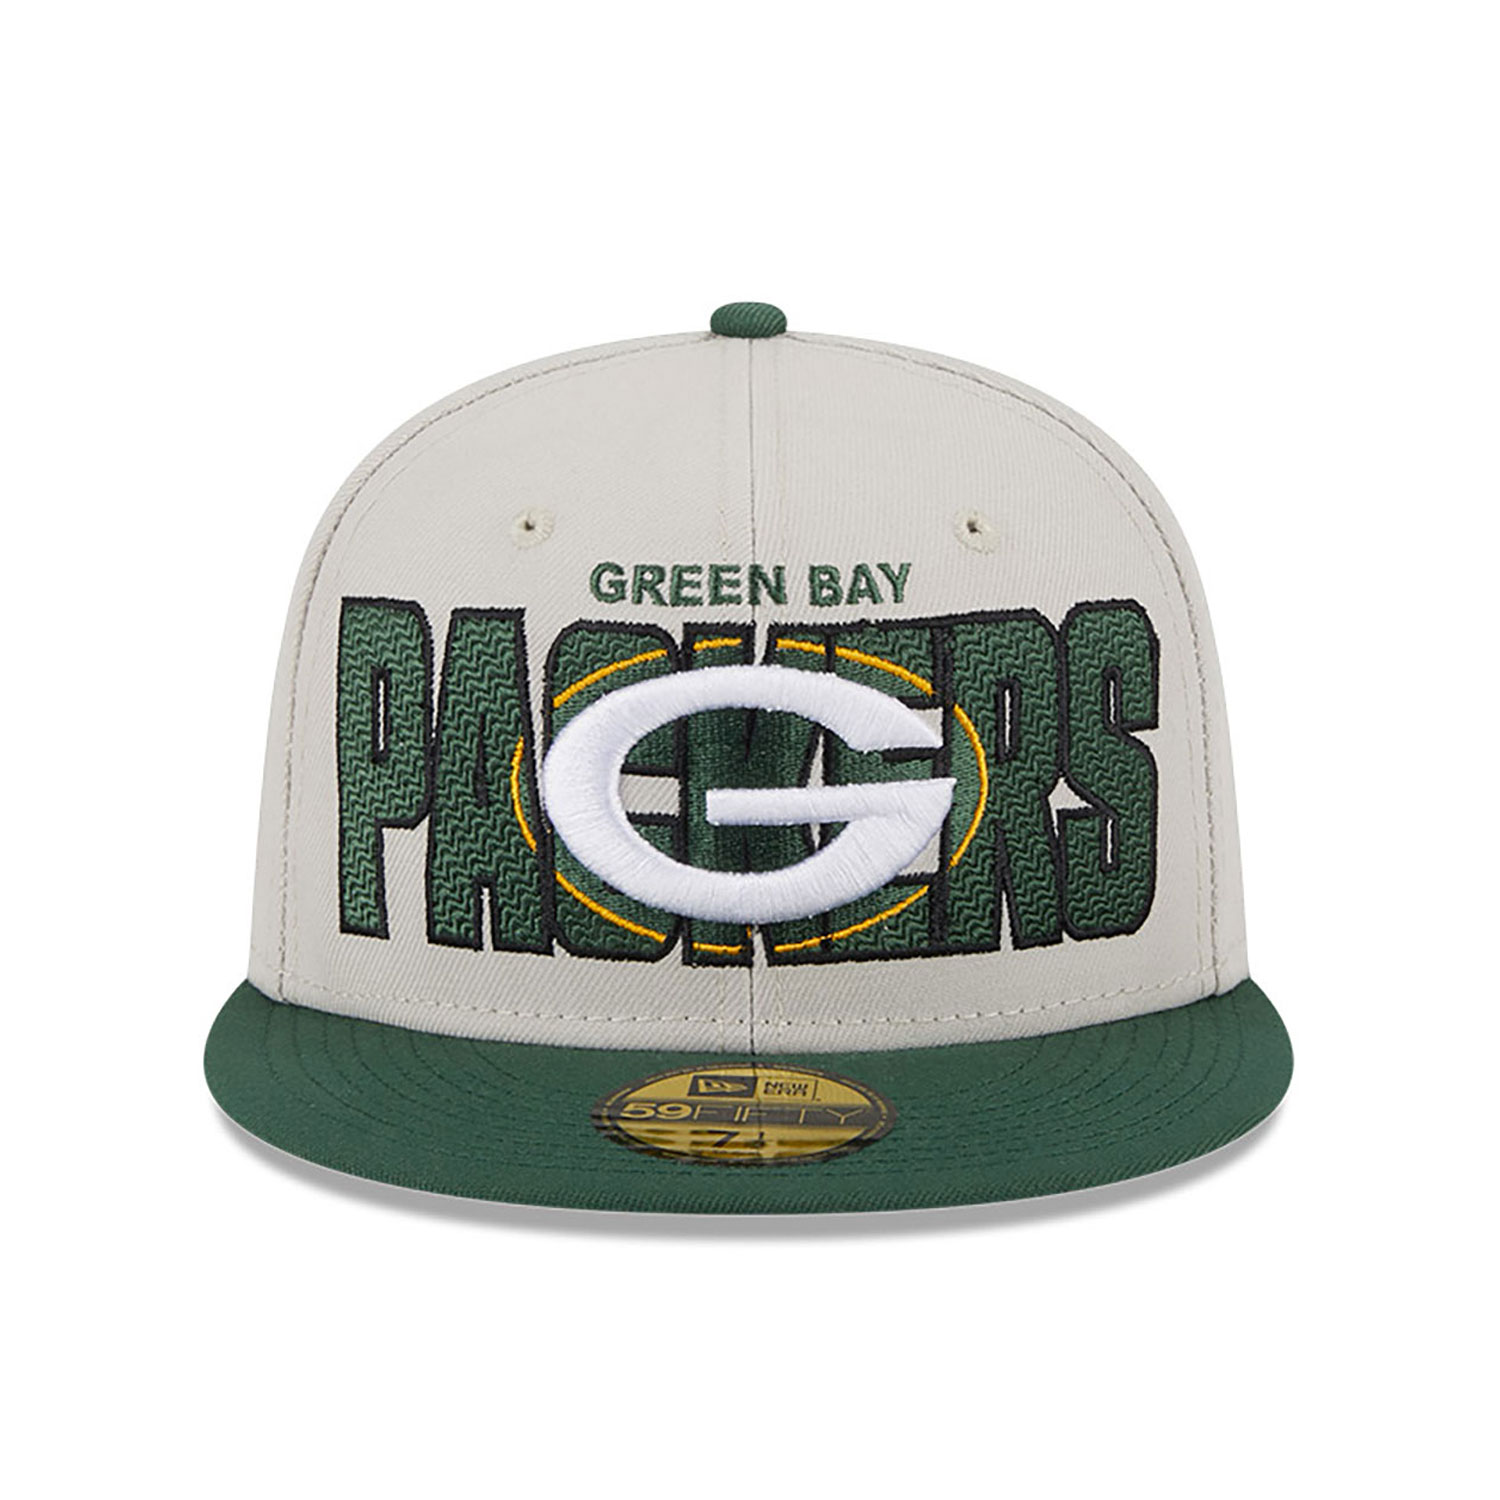 Official New Era NFL23 Draft Green Bay Packers 59FIFTY Fitted Cap C2 ...